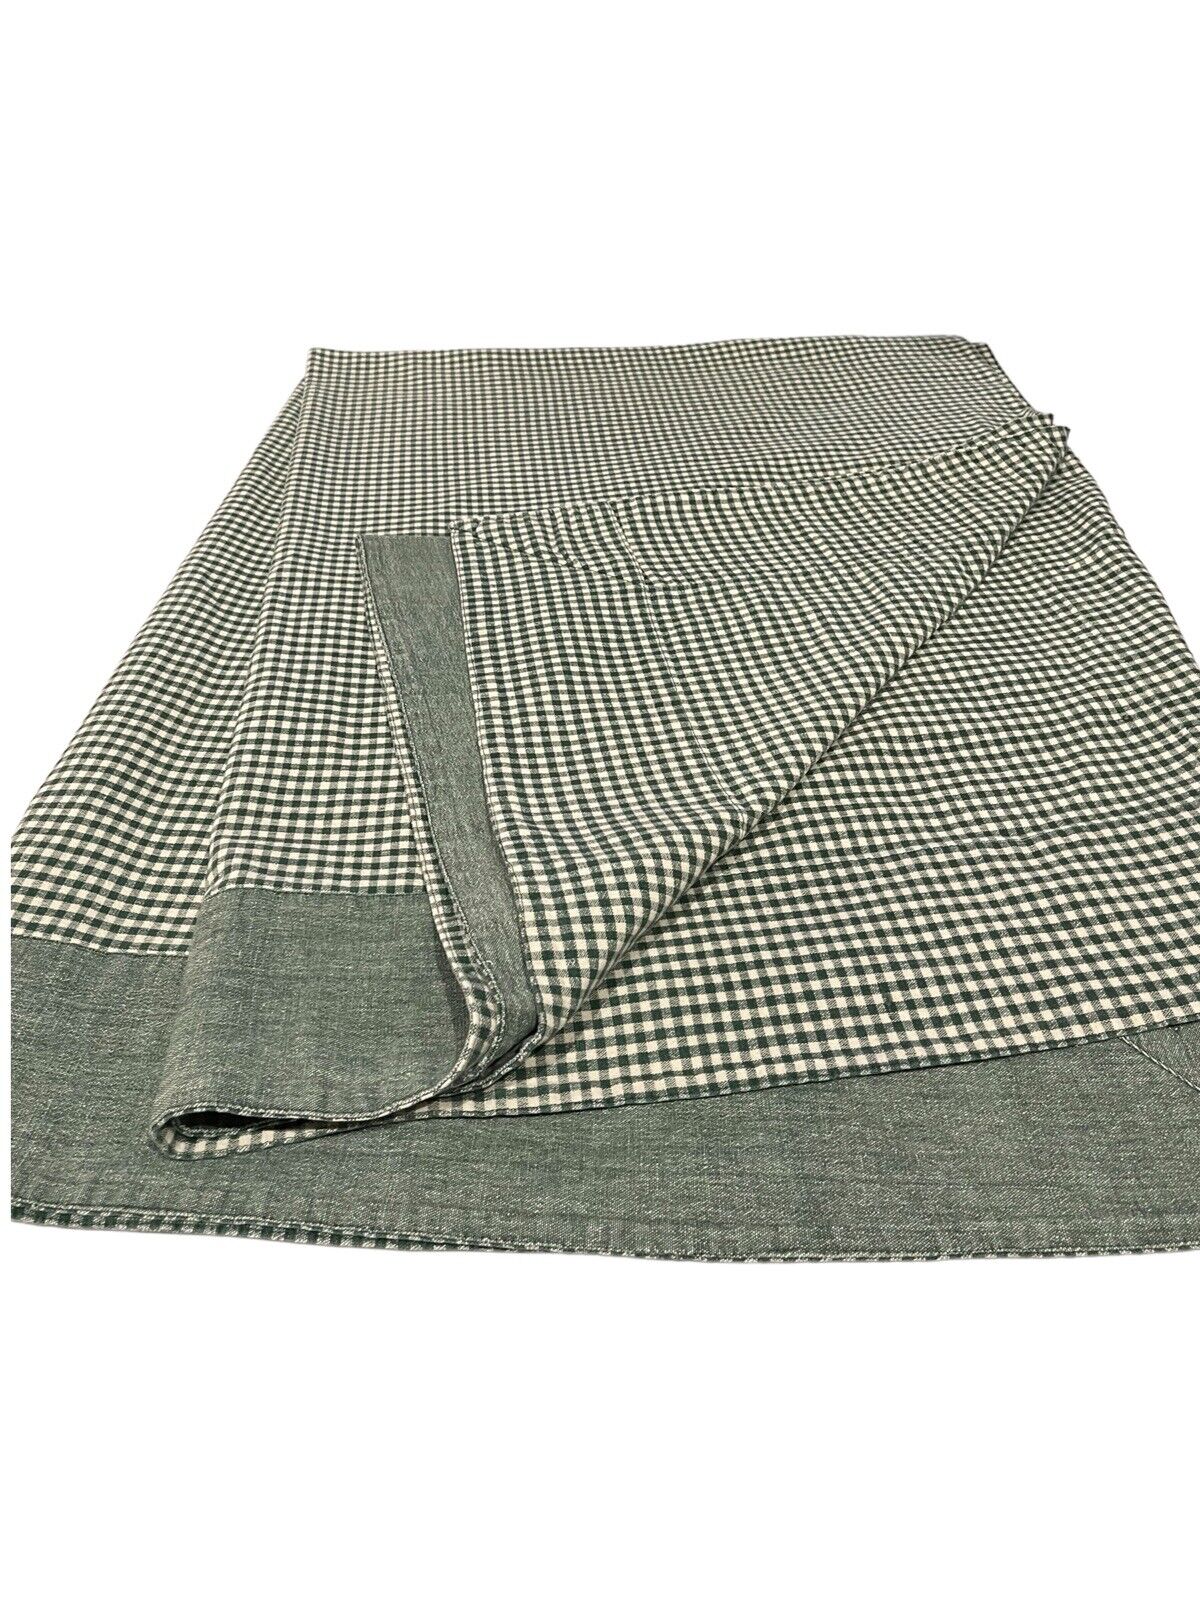 Large Tablecloth 100% Cotton VTG Dark Green Check with Border Reversible 96 X 66